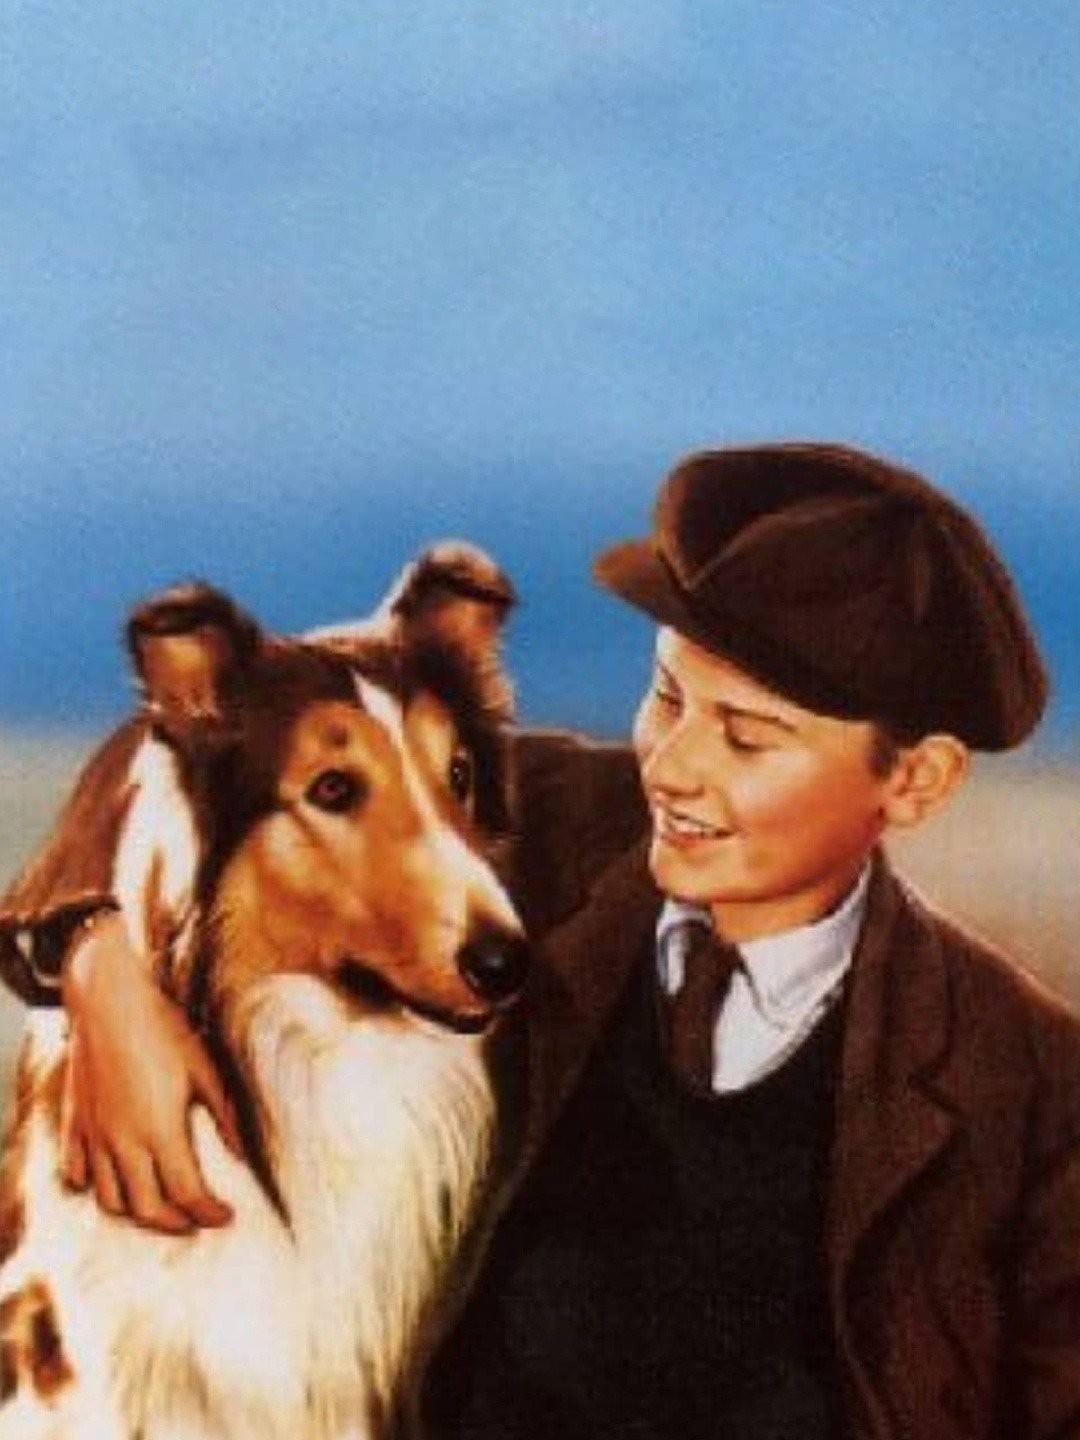 Lassie Come Home - Where to Watch and Stream - TV Guide